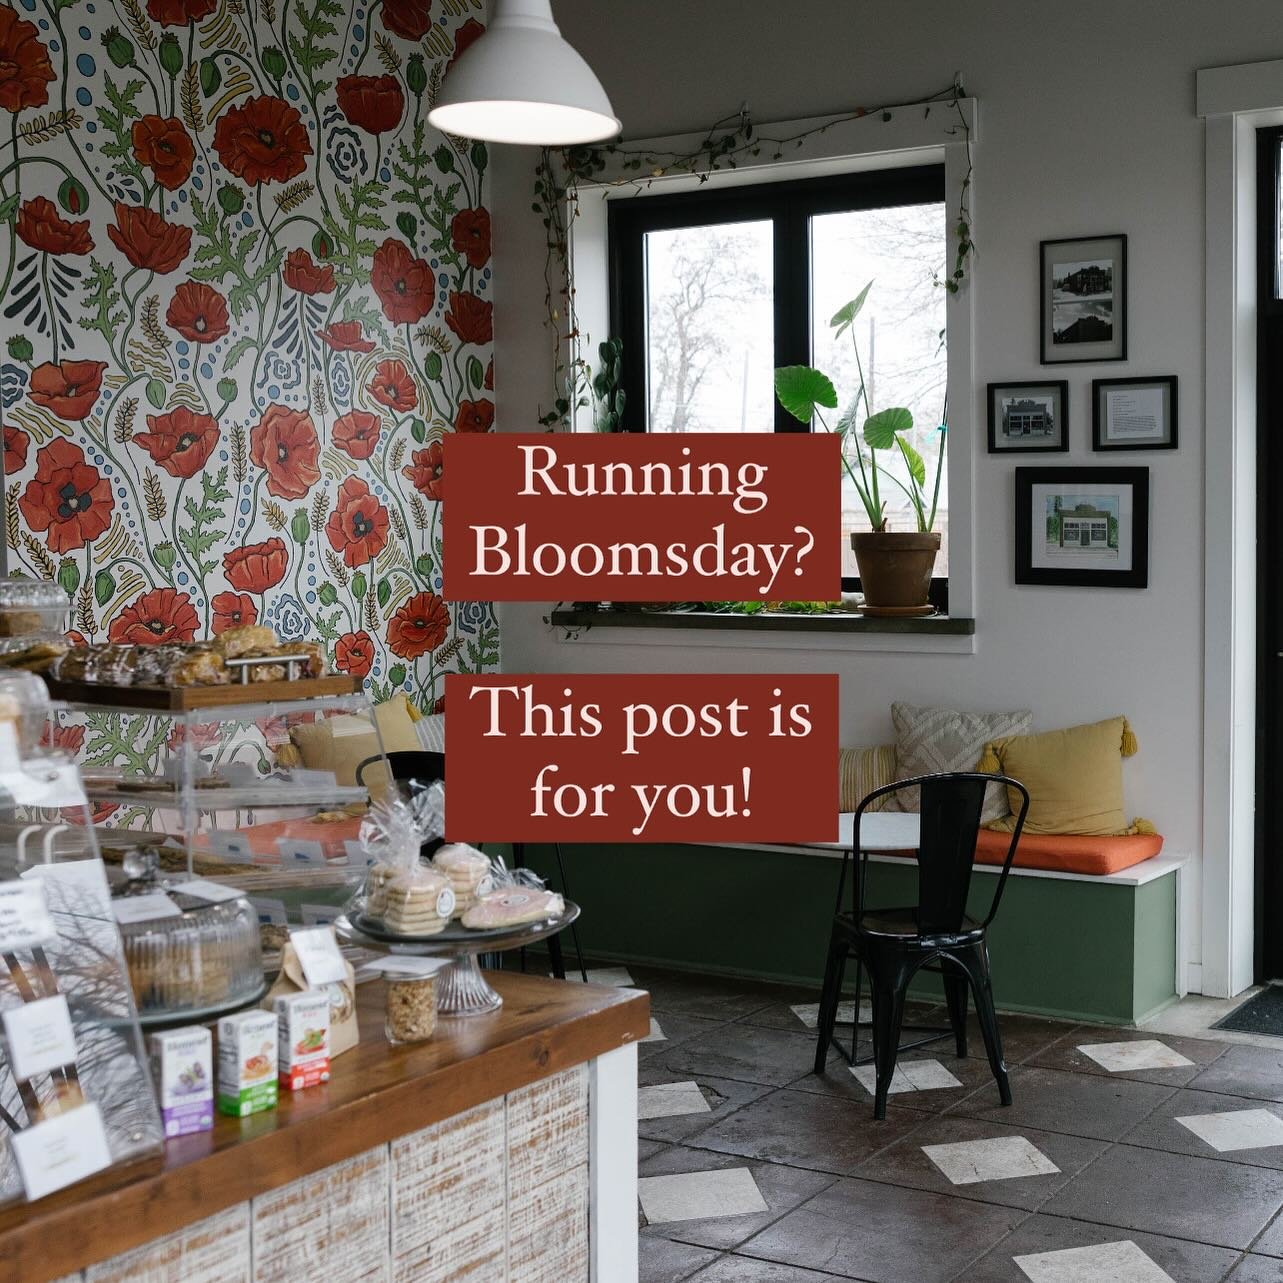 ATTENTION BLOOMSDAY PARTICIPANTS!

For Bloomsday, we are giving away 1 free pastry to any participant who comes in with their race bib or finisher t-shirt!

So make us your first stop after the race to refuel on coffee and a free pastry!!!

WE LOVE B